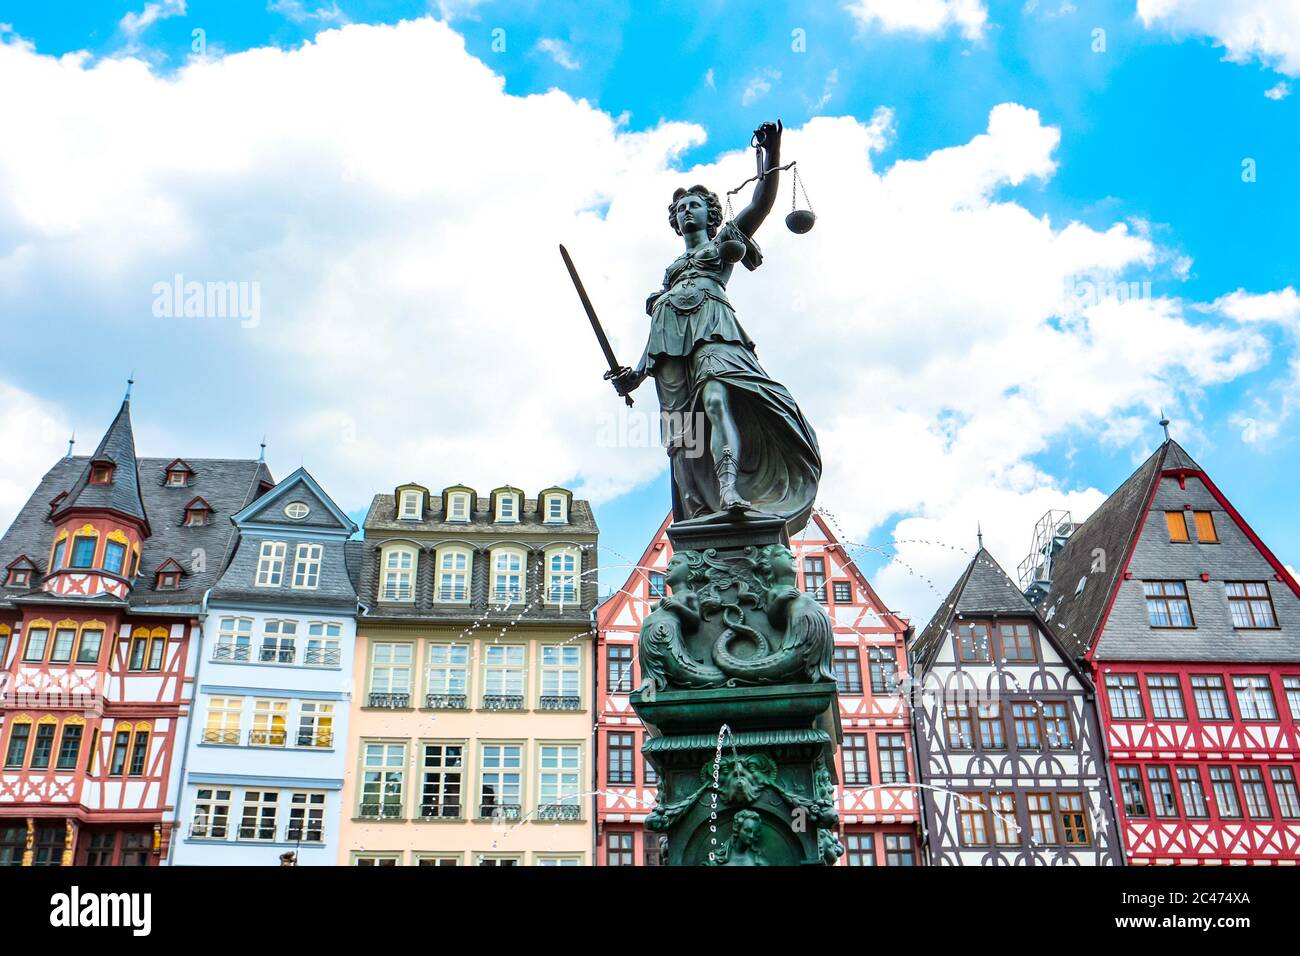 Justitia bronze statue at Gerechtigkeitsbrunnen in front of historical half-timbered buildings on Römerberg Square in Frankfurt am Main, Germany. Stock Photo